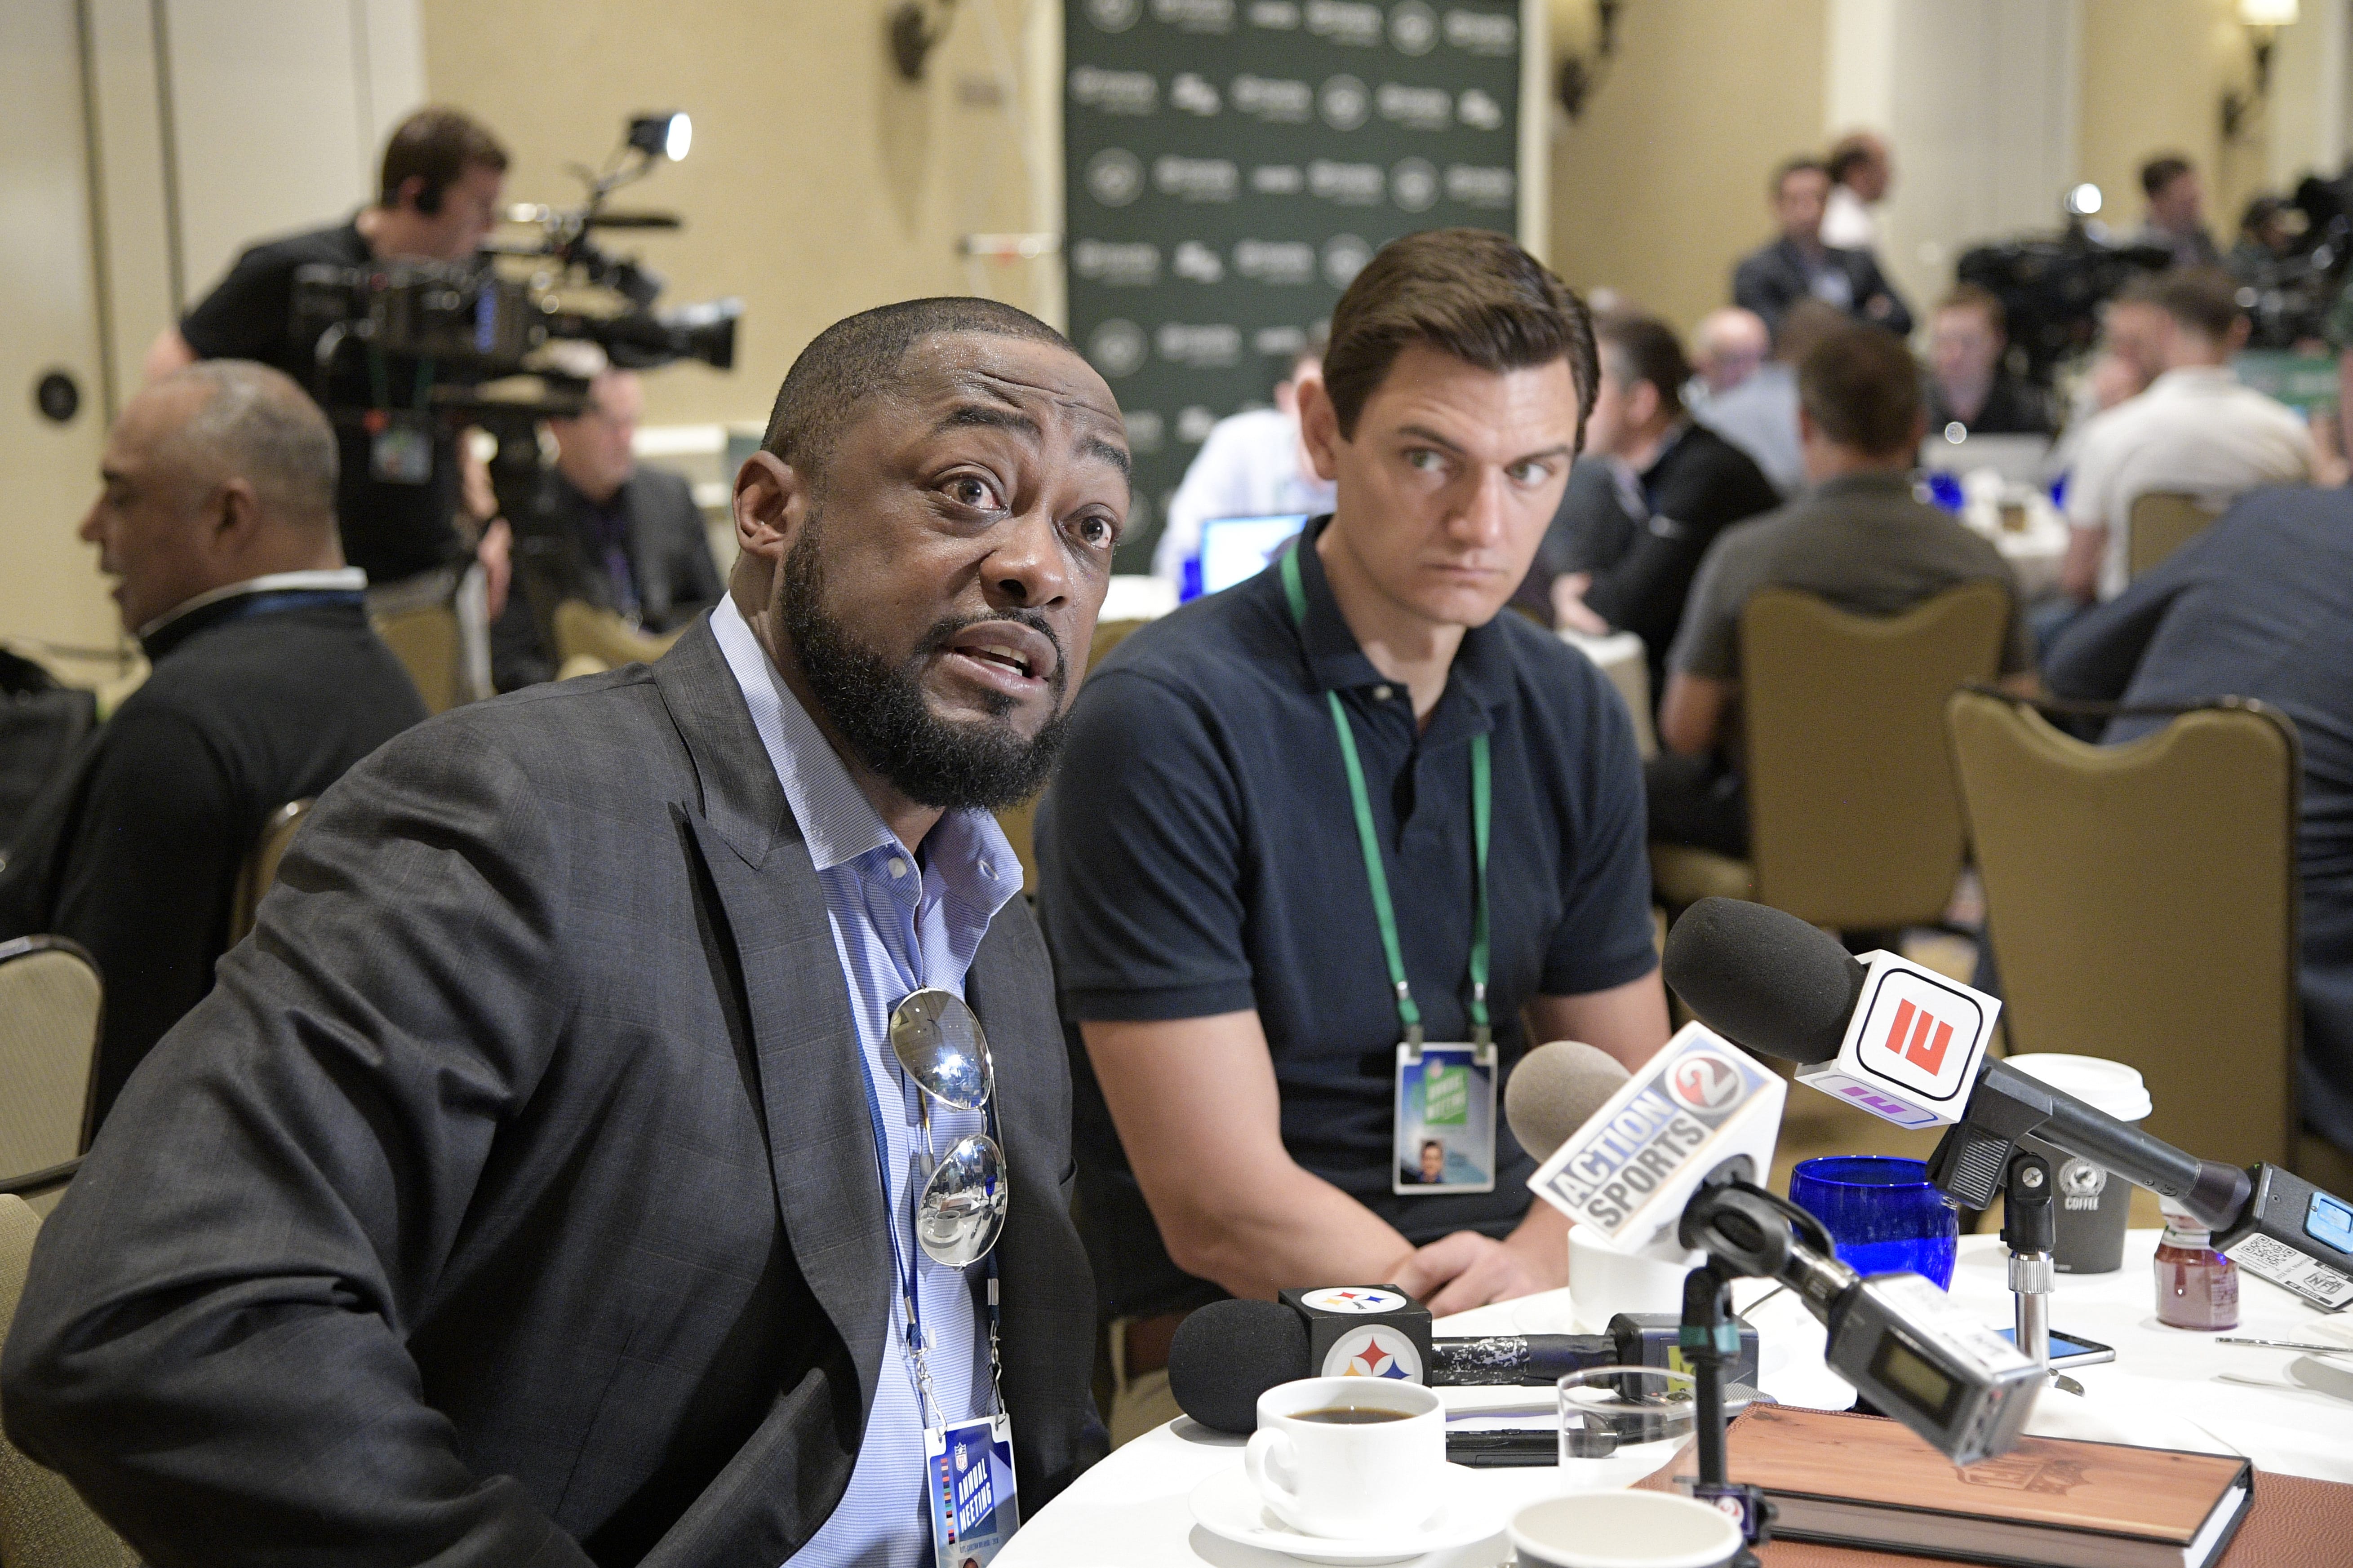 Pittsburgh Steelers head football coach Mike Tomlin, left, answers a question from a reporter at the coaches breakfast during the NFL owners meetings, Tuesday, March 27, 2018 in Orlando, Fla. (Phelan M.